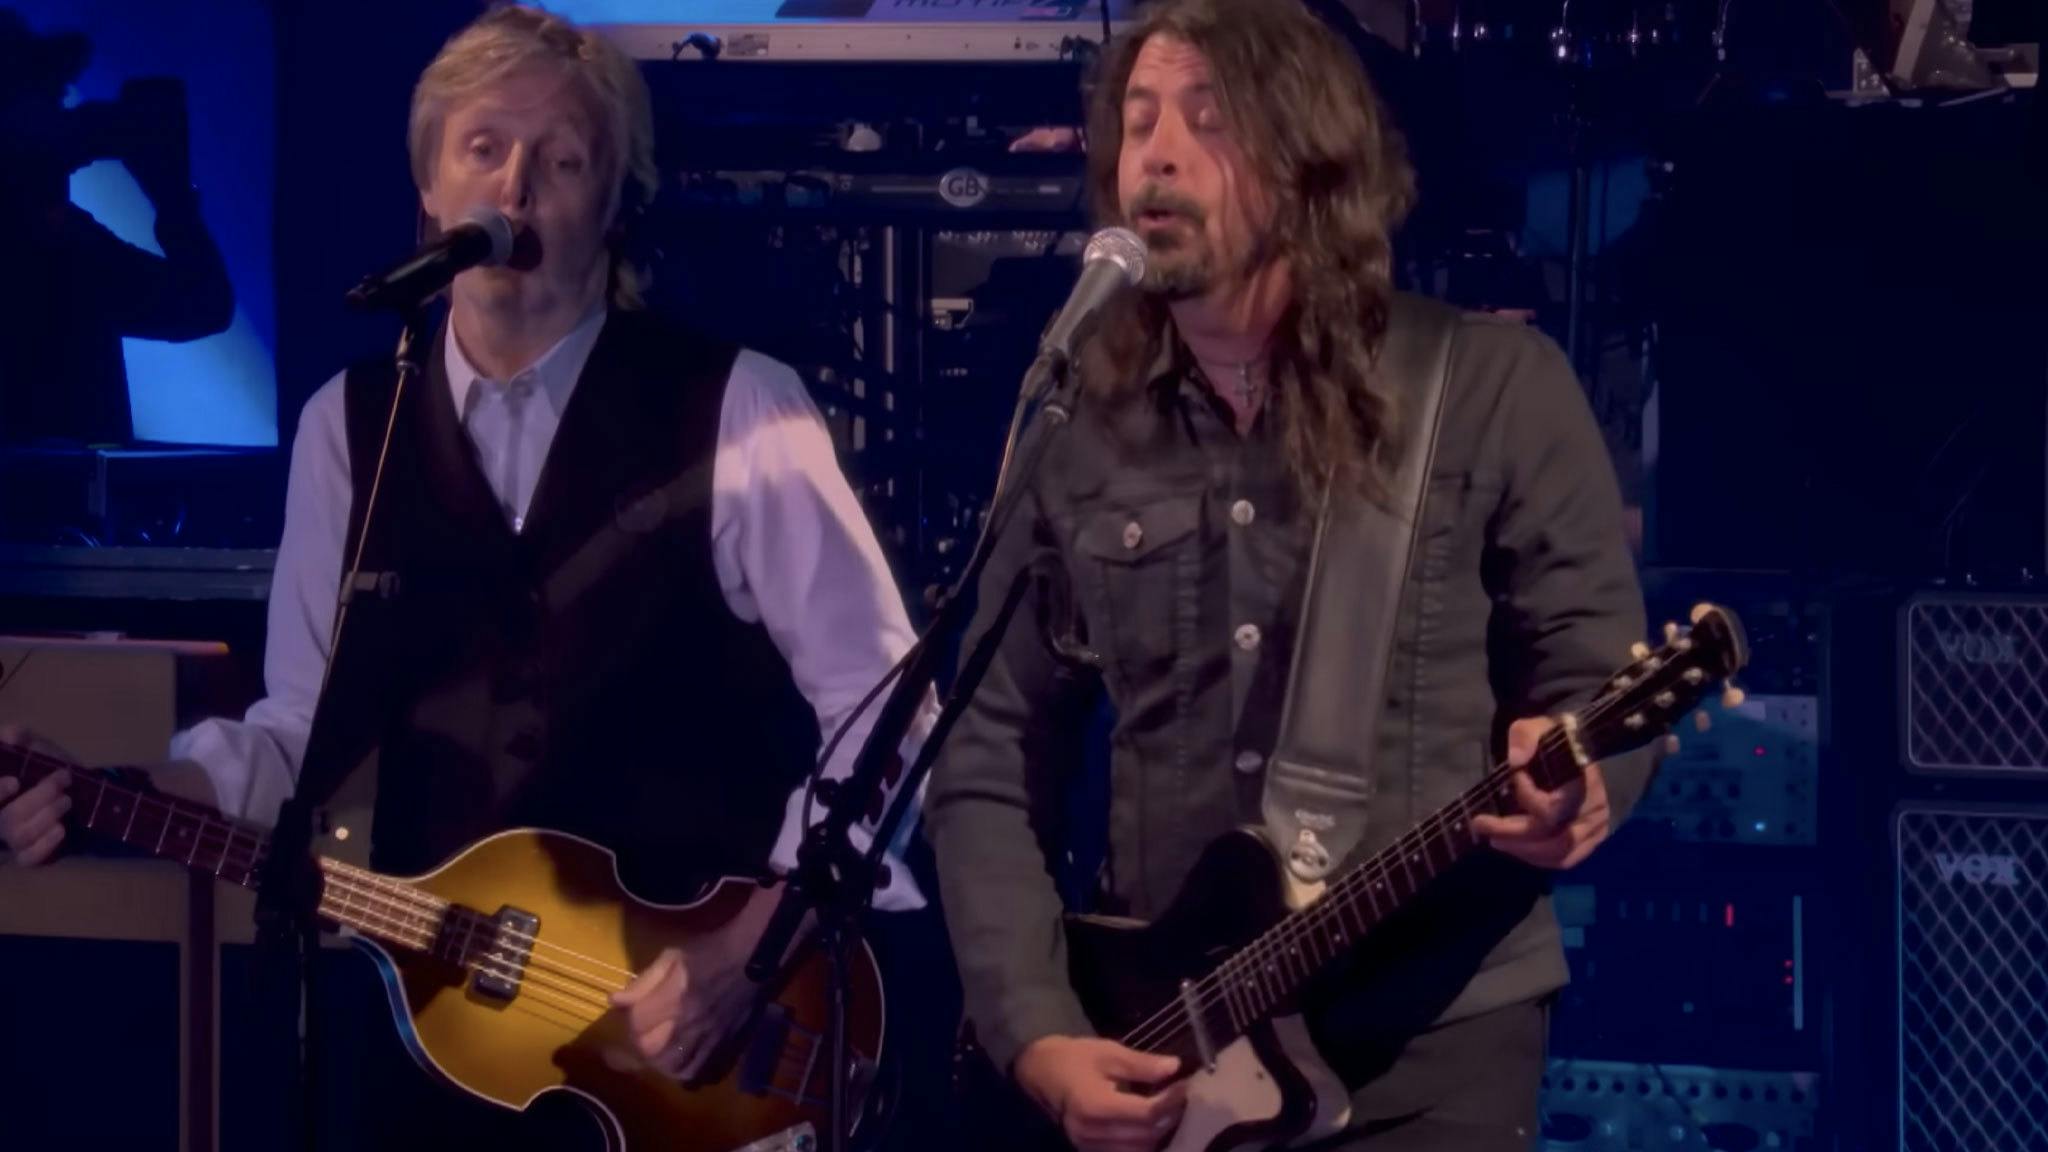 Dave Grohl joins Paul McCartney at Glastonbury for first performance since Taylor Hawkins’ death